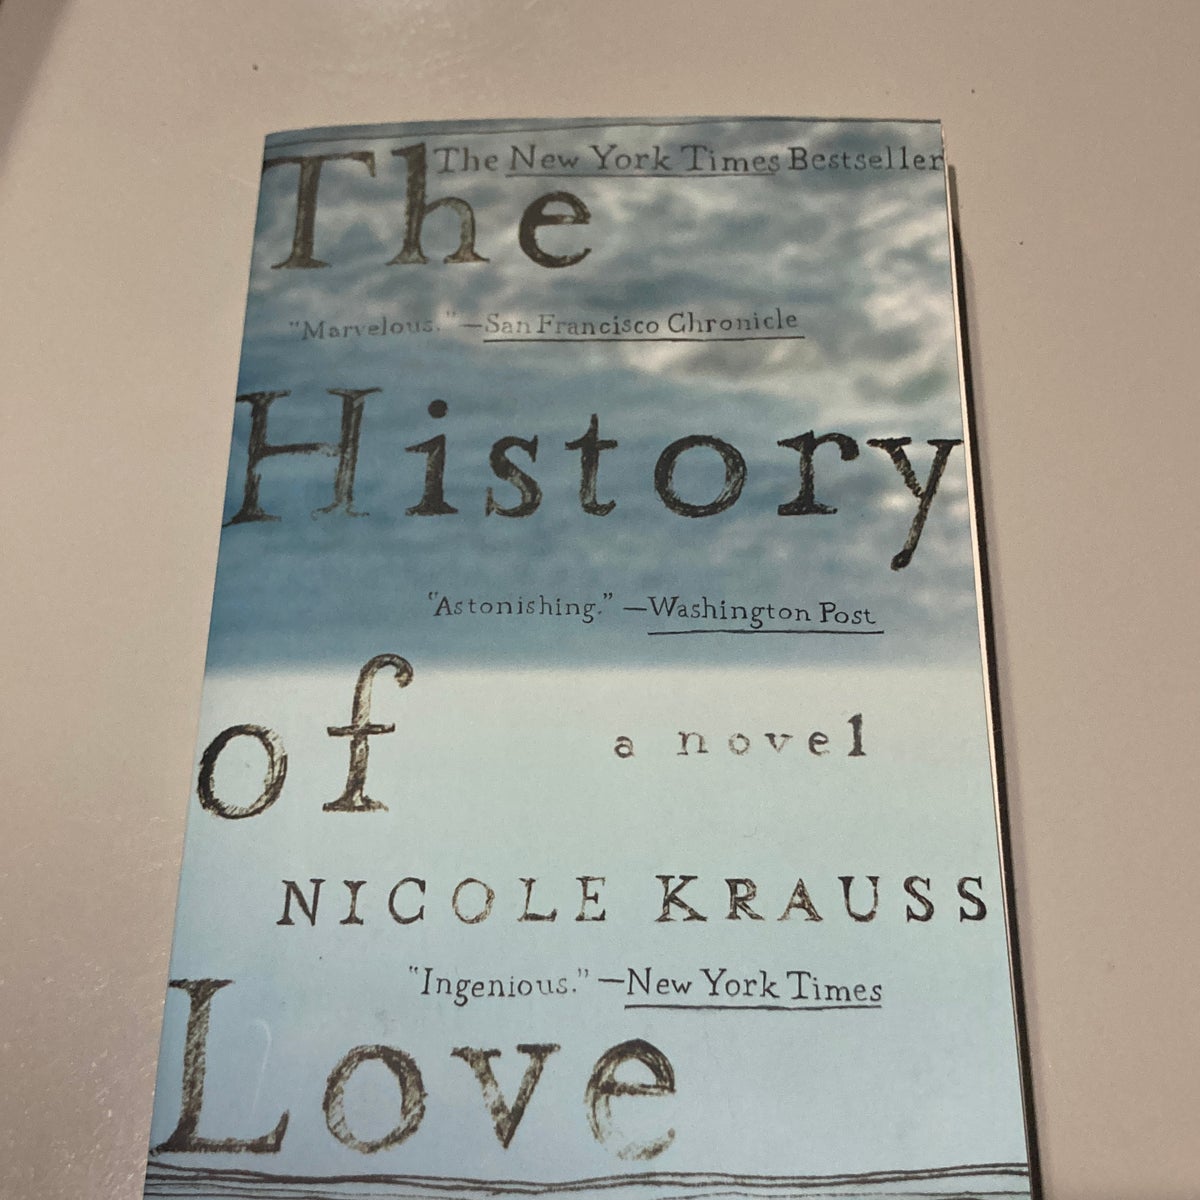 book review history of love